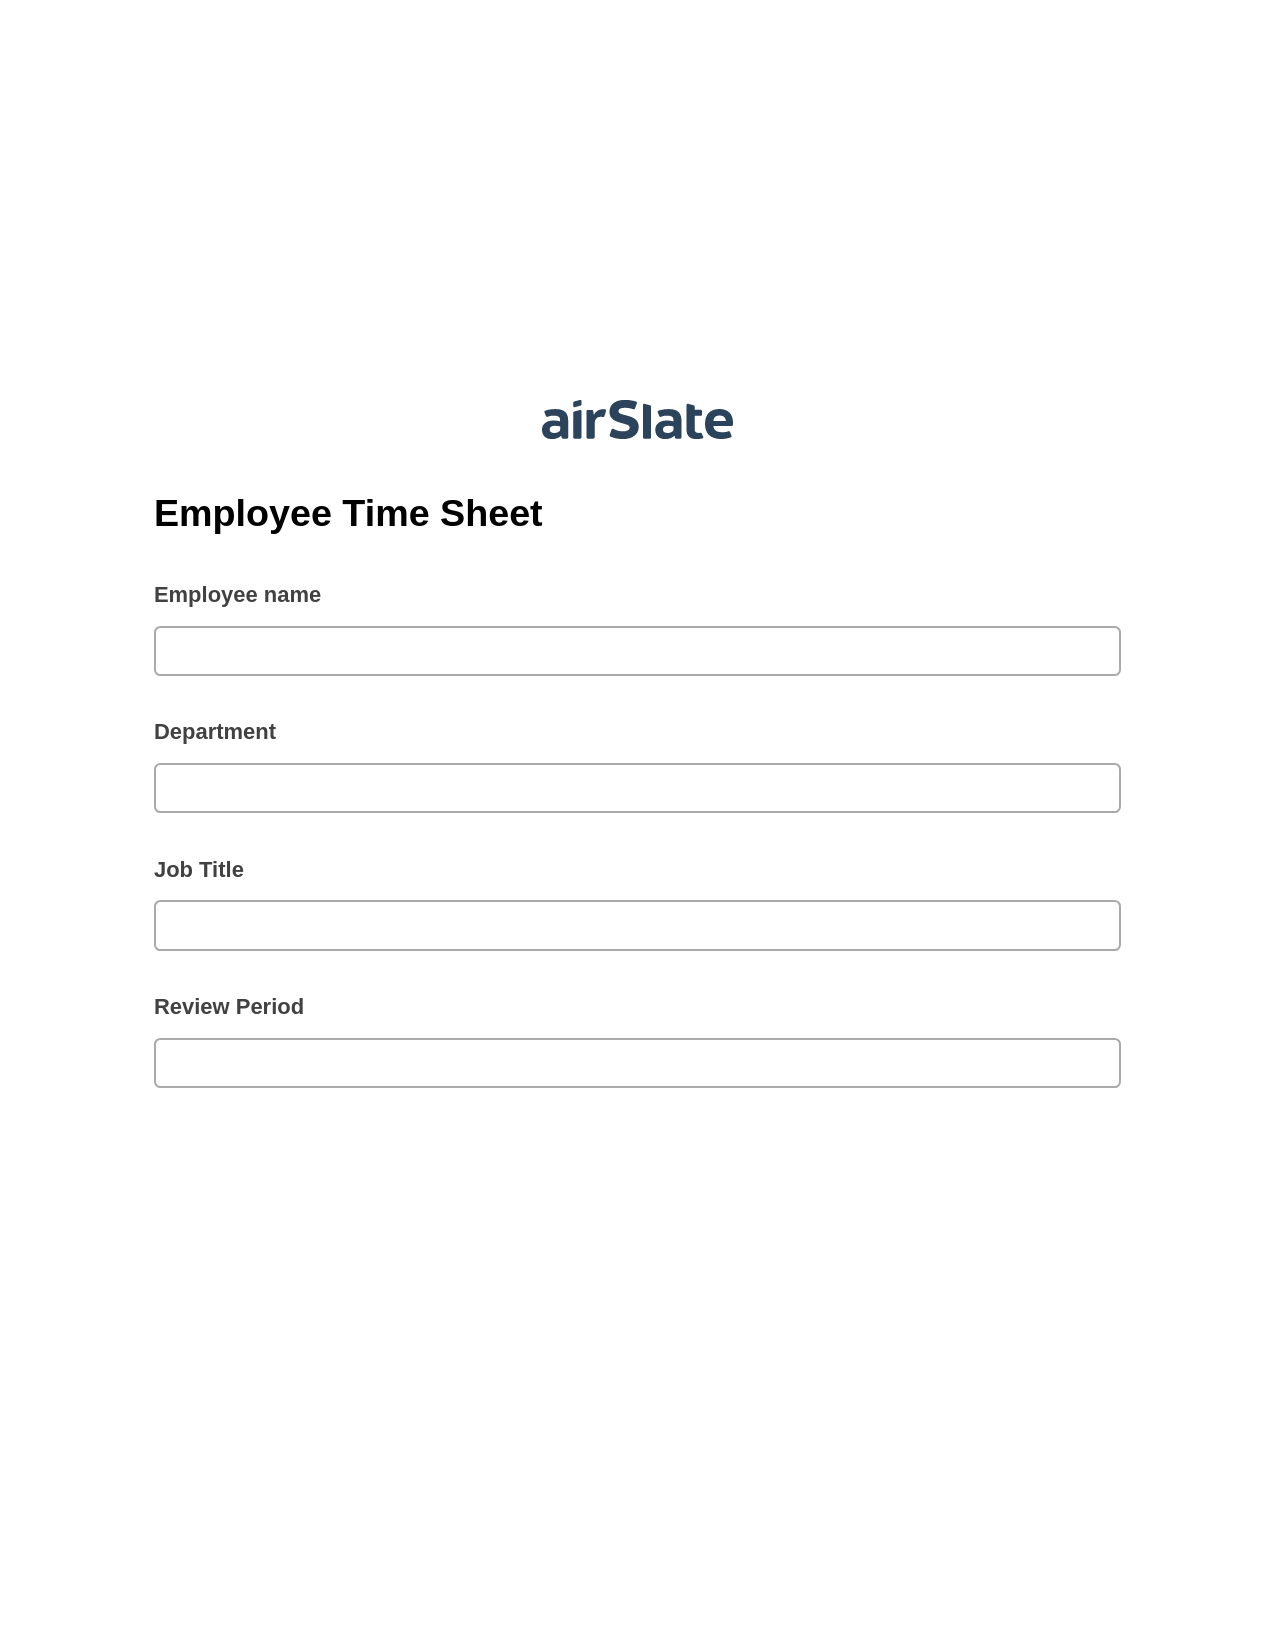 Multirole Employee Time Sheet Pre-fill Dropdowns from Airtable, Update Audit Trail Bot, Export to NetSuite Bot